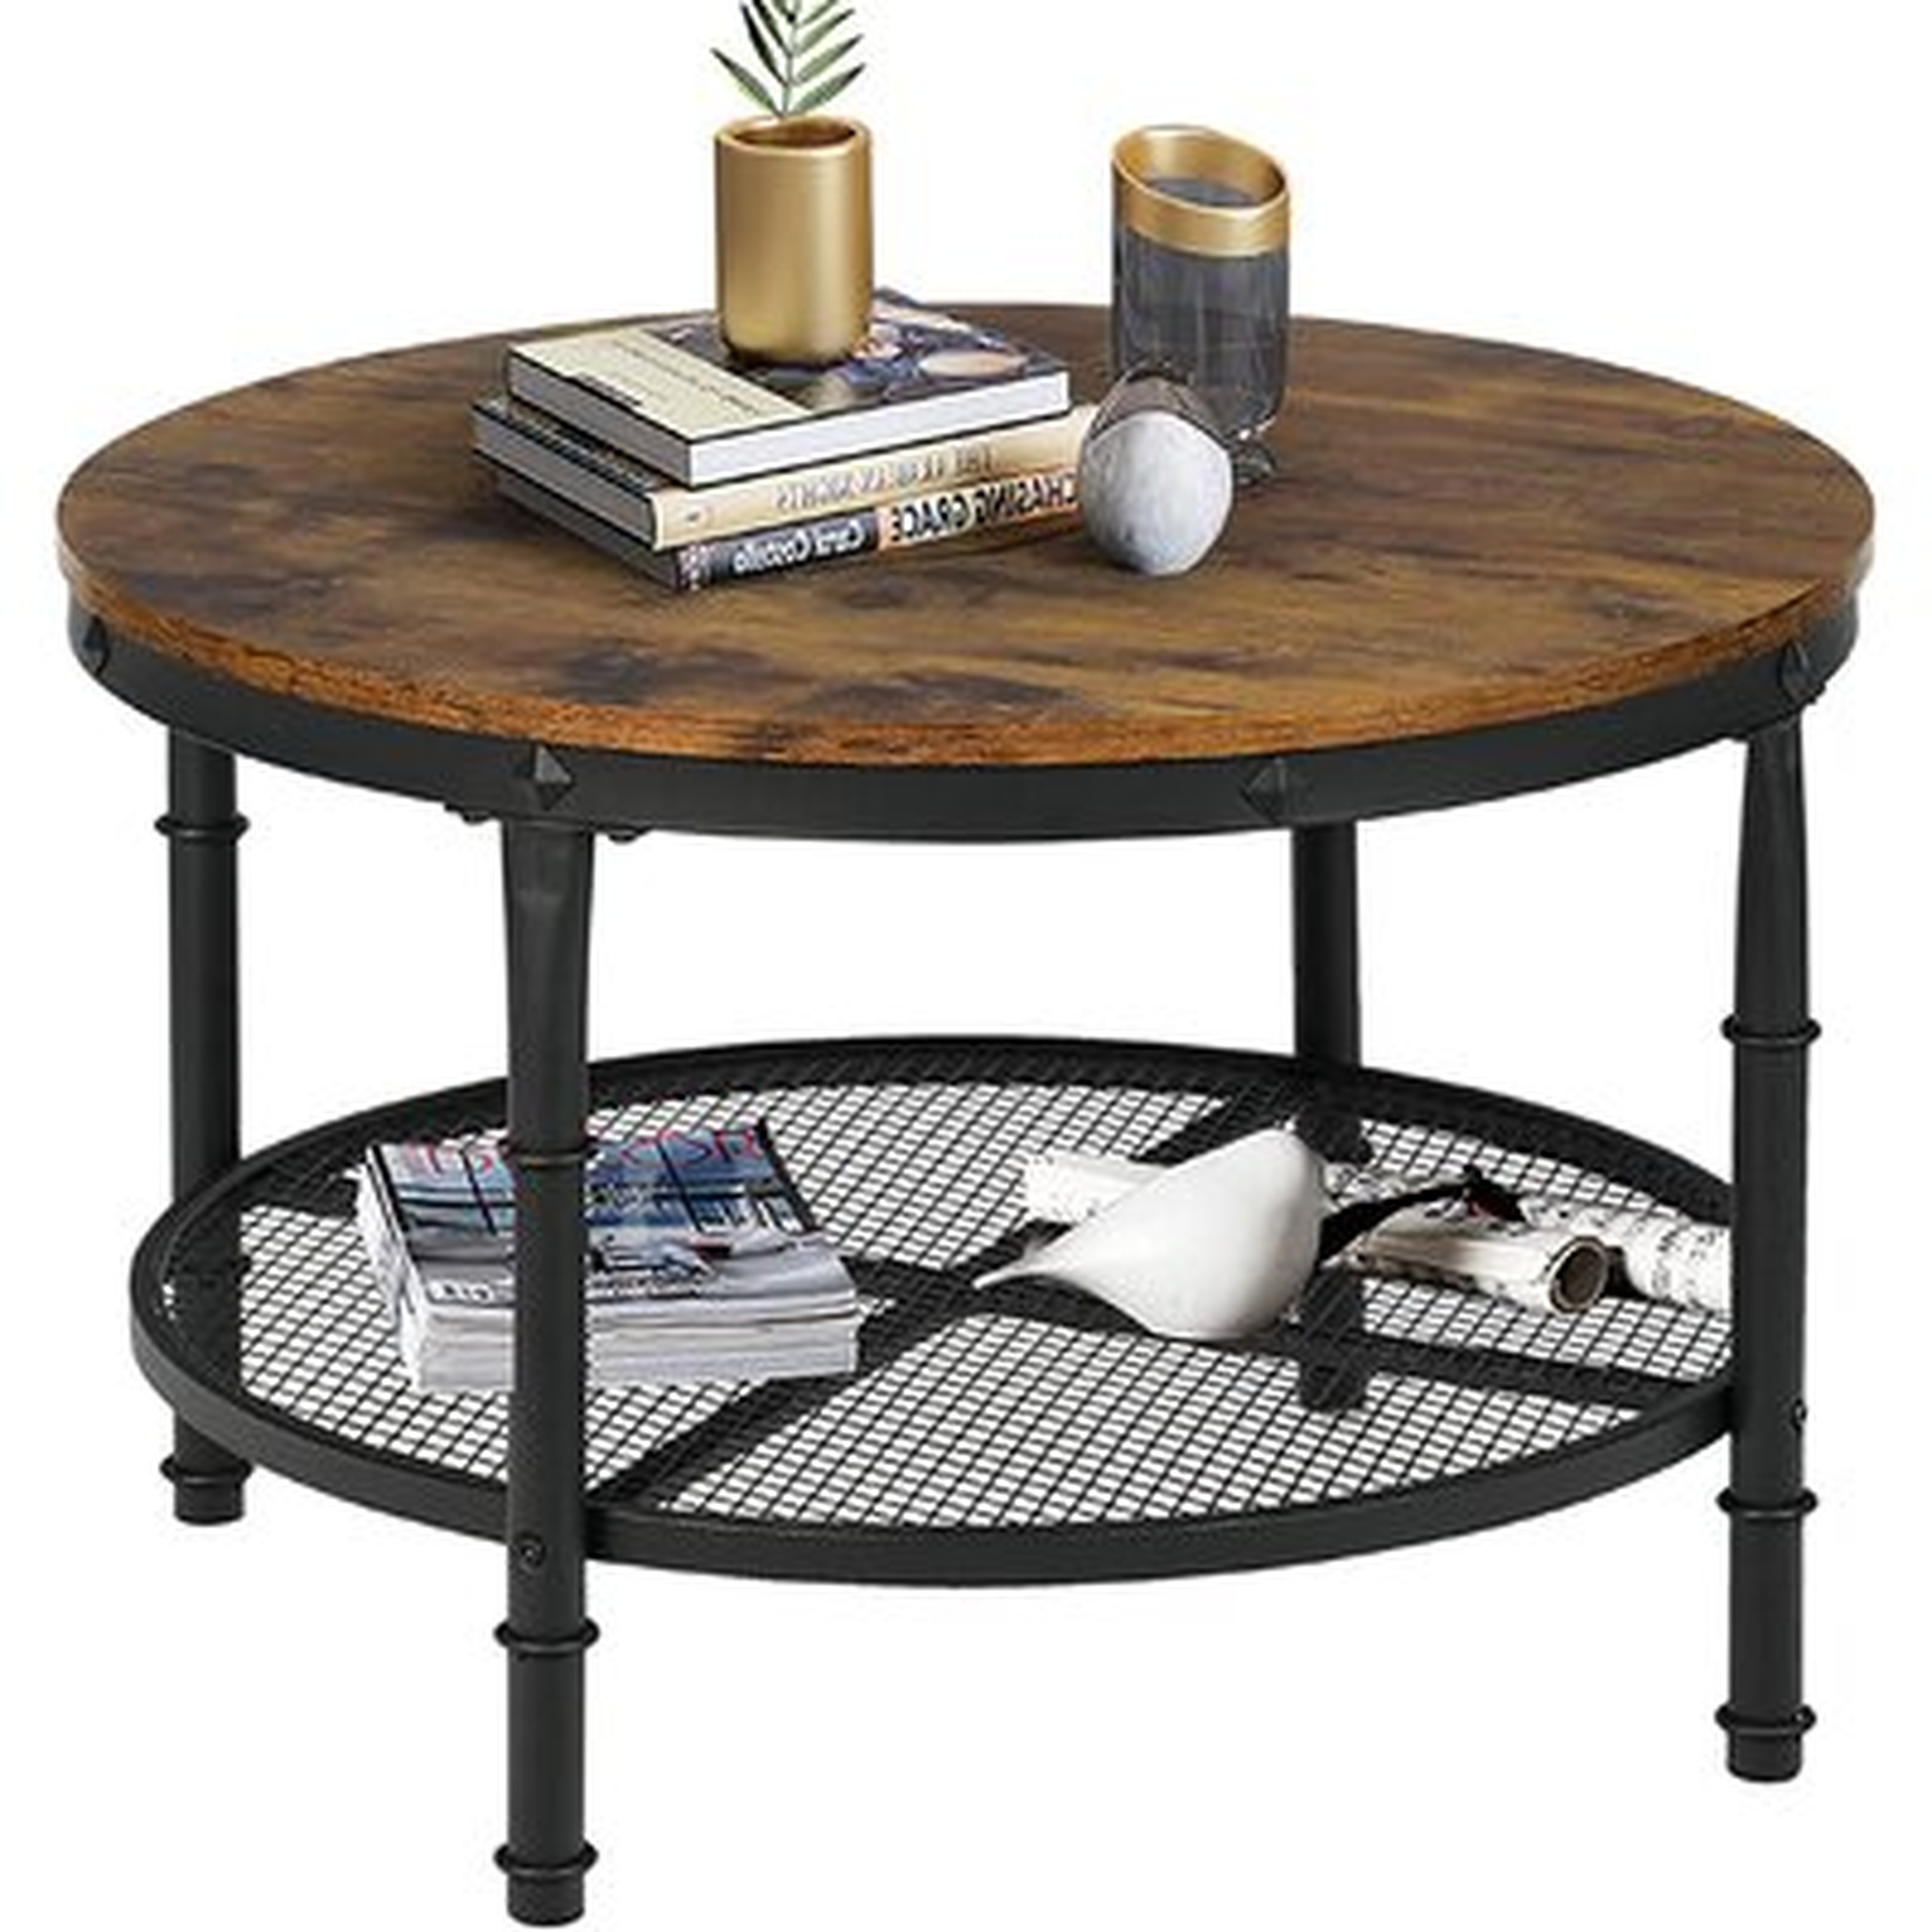 Small Round Coffee Table With Storage, Brown - Wayfair